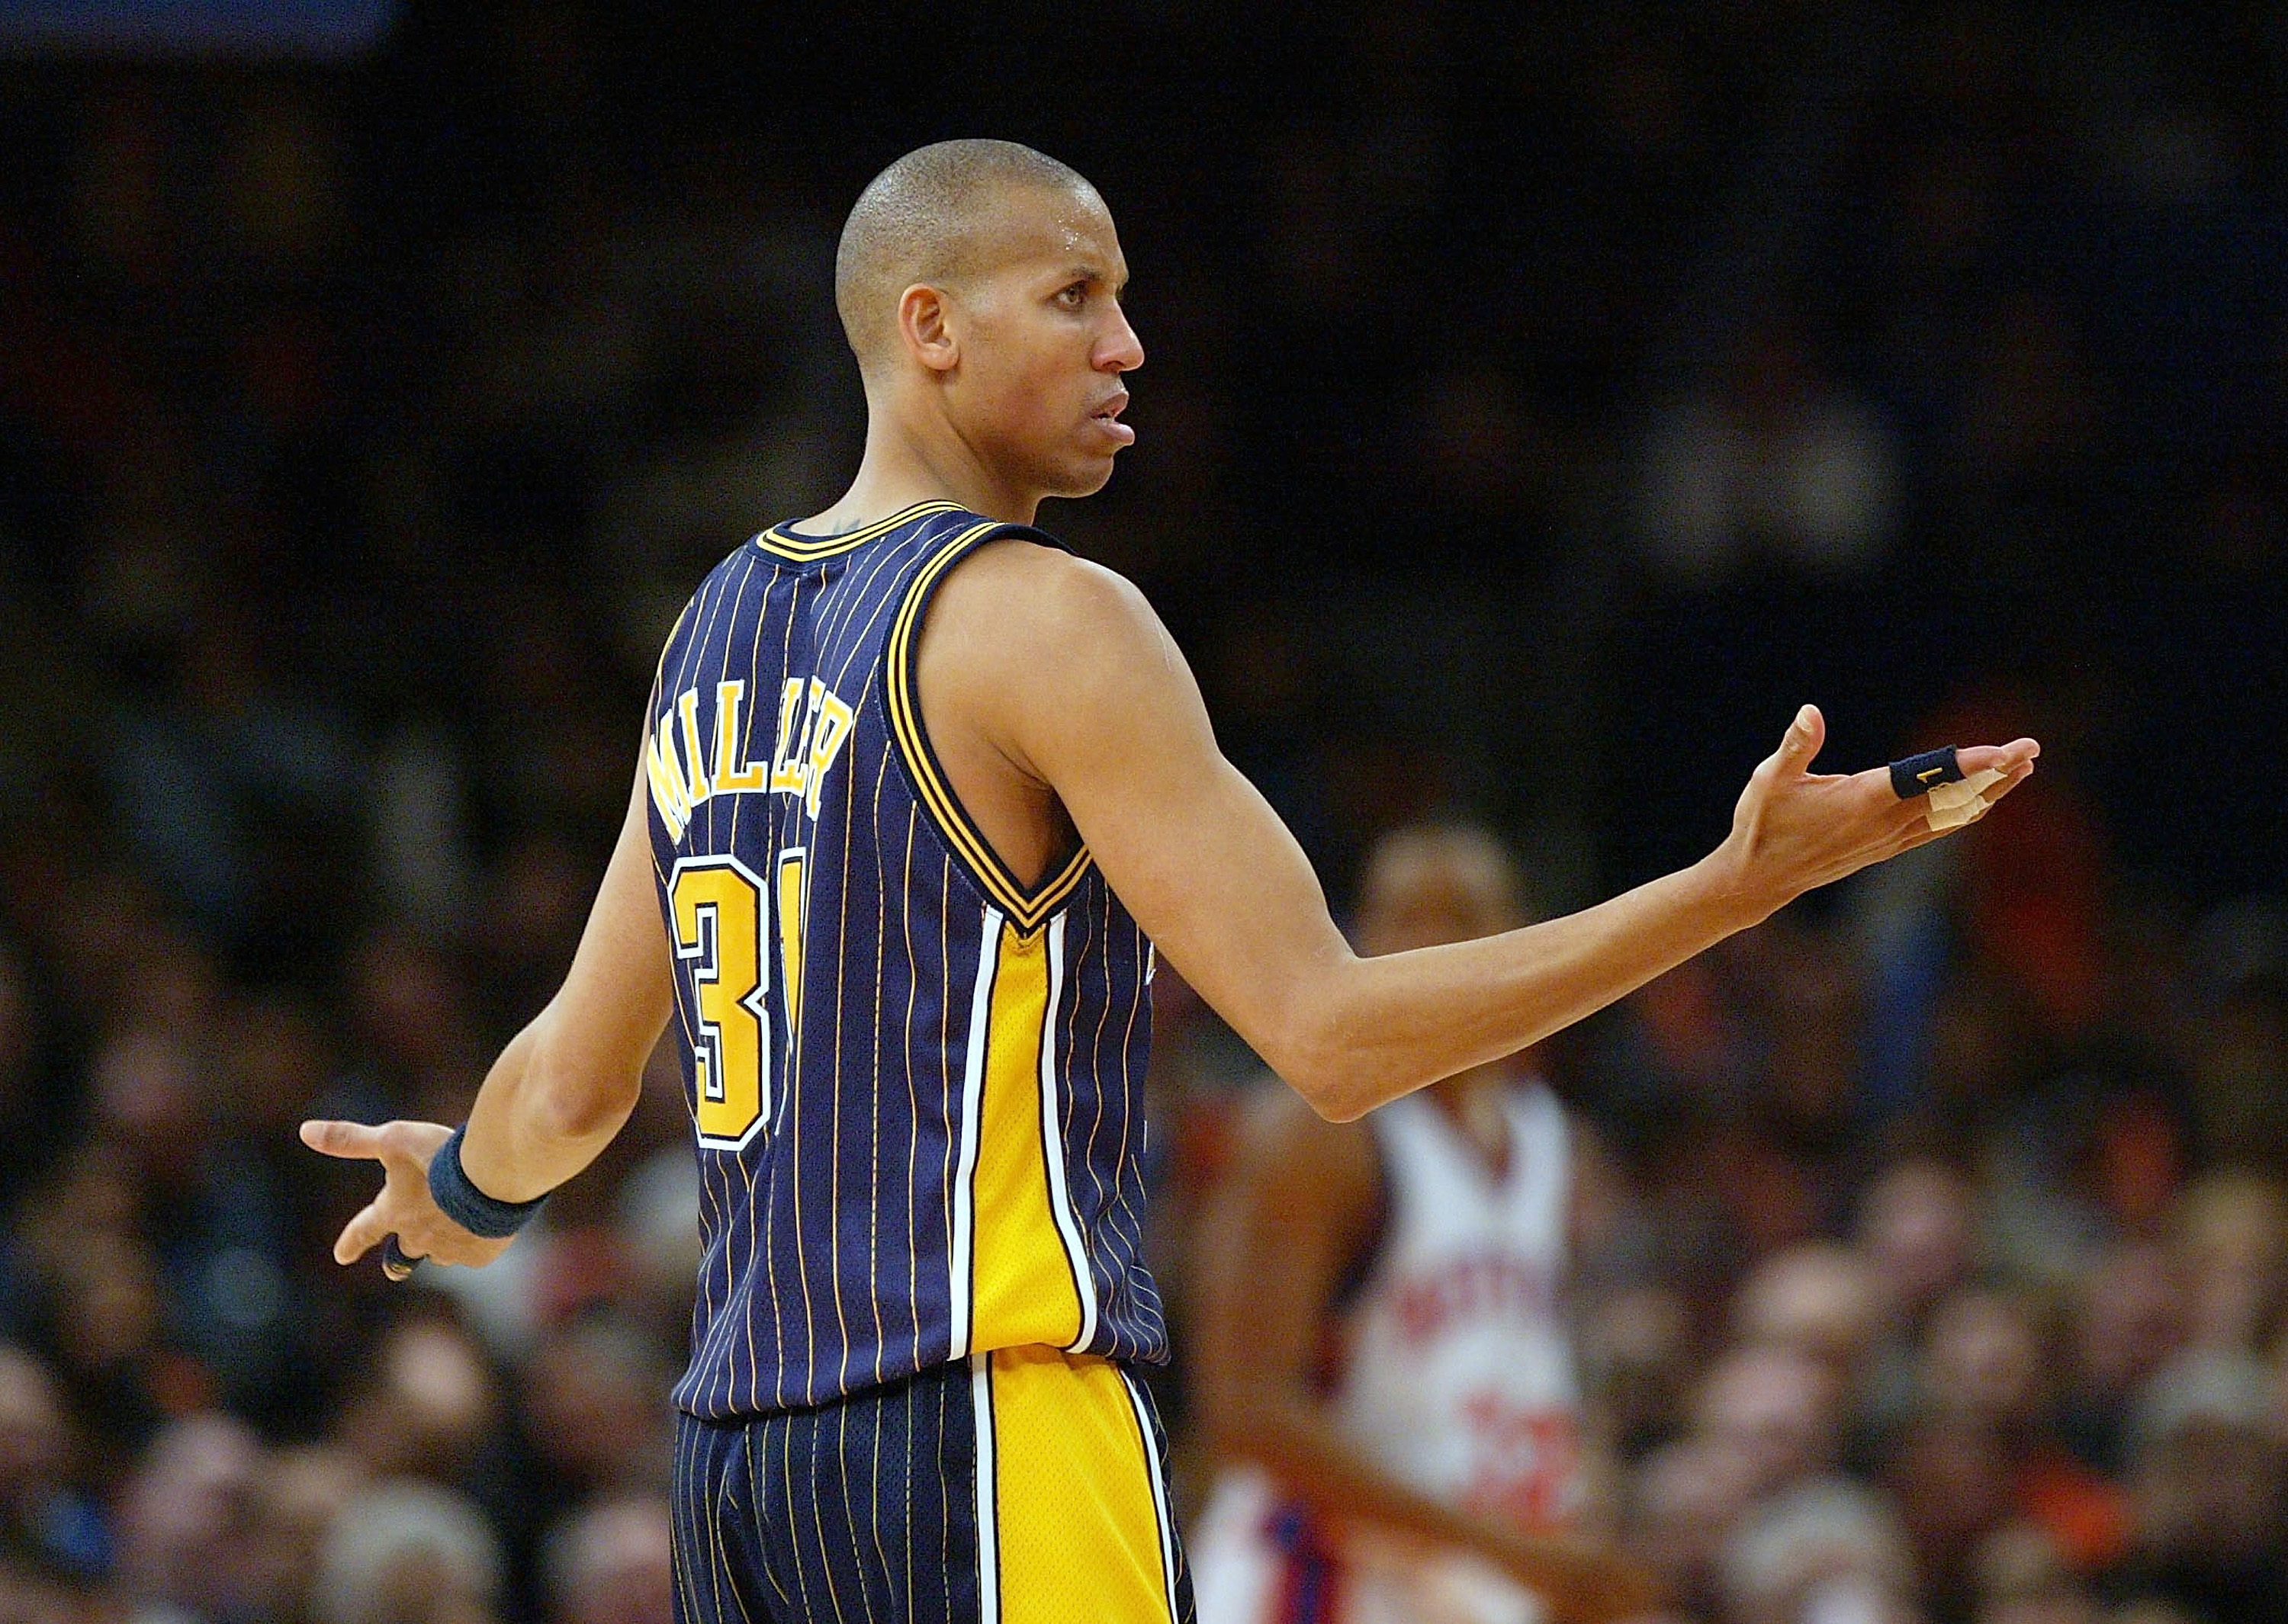 NEW YORK - FEBRUARY 3:  Reggie Miller #31 of the Indiana Pacers questions a call during their game against the New York Knicks on February 3, 2004 at Madison Square Garden in New York City. The Knicks won 97-90.  NOTE TO USER: User expressly acknowledges